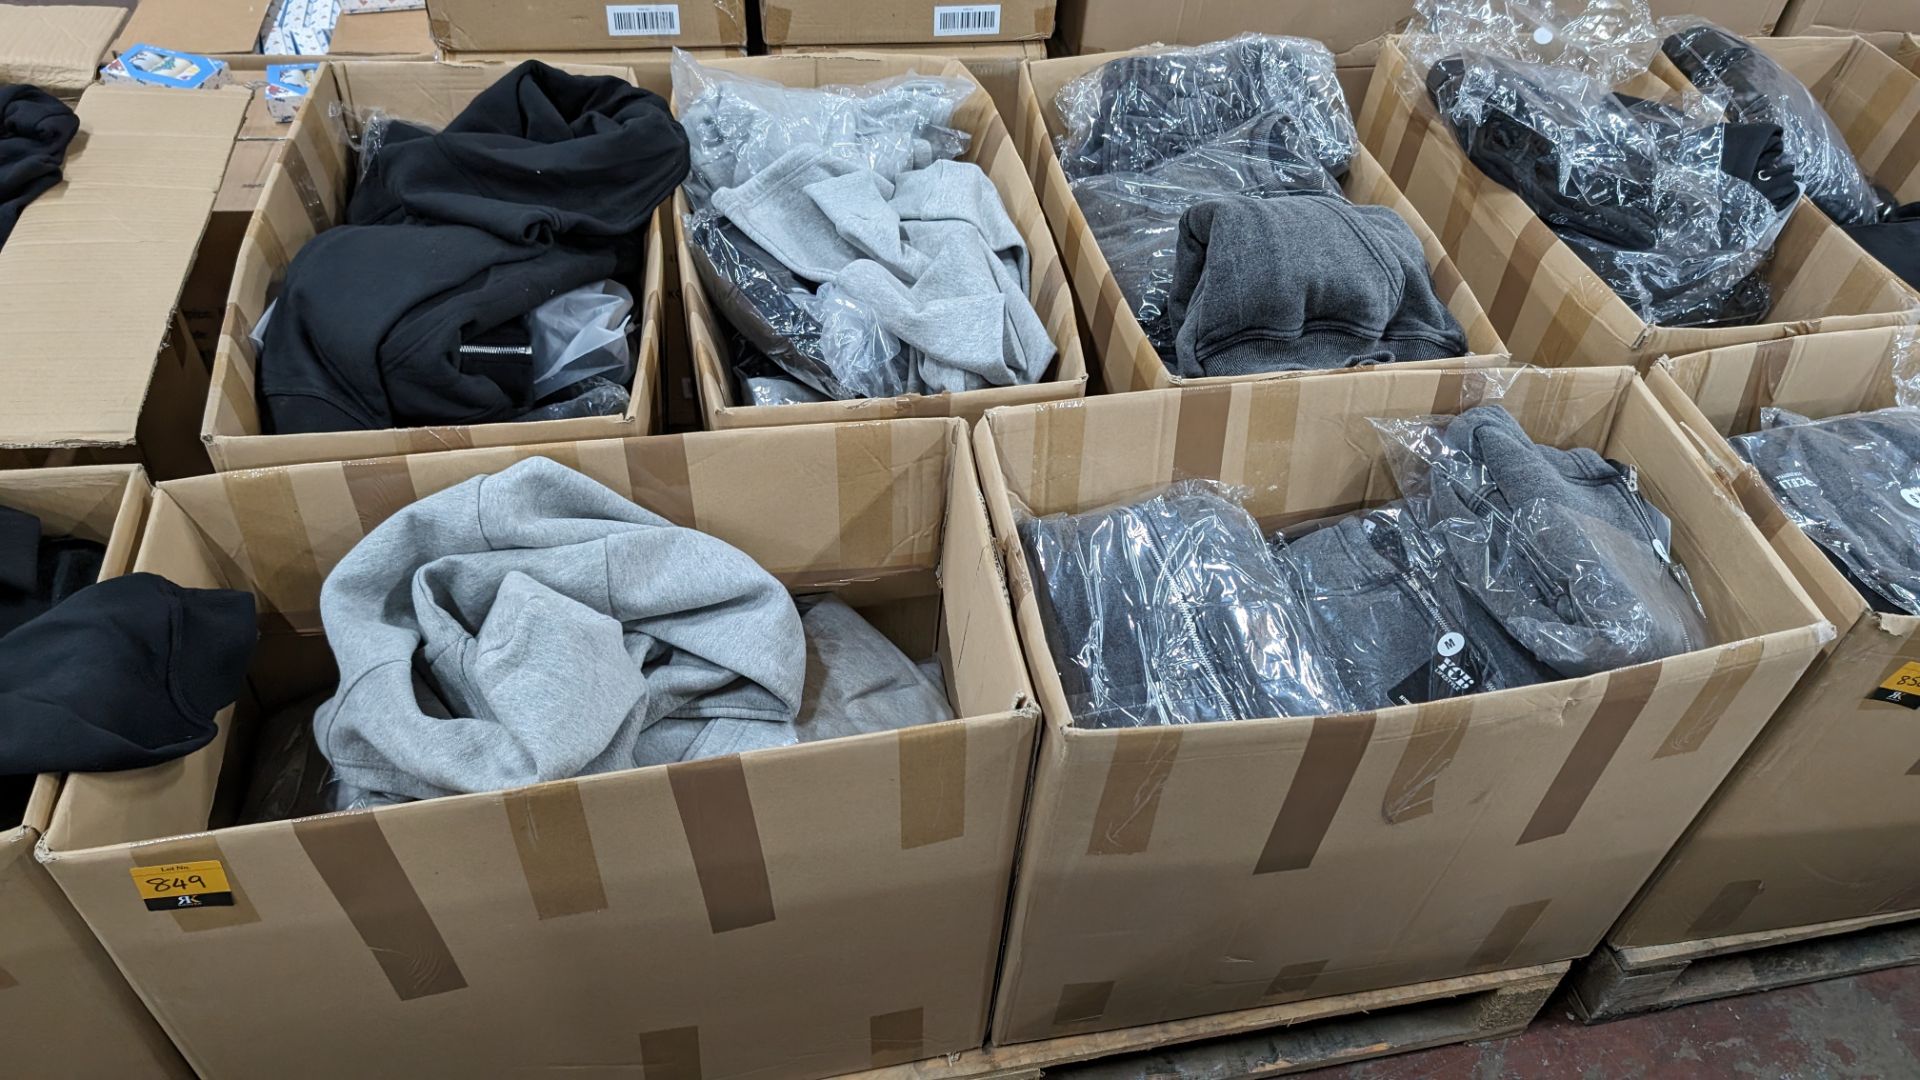 5 boxes of YCB zip-up hoodies, crop tops & similar - the contents of a pallet